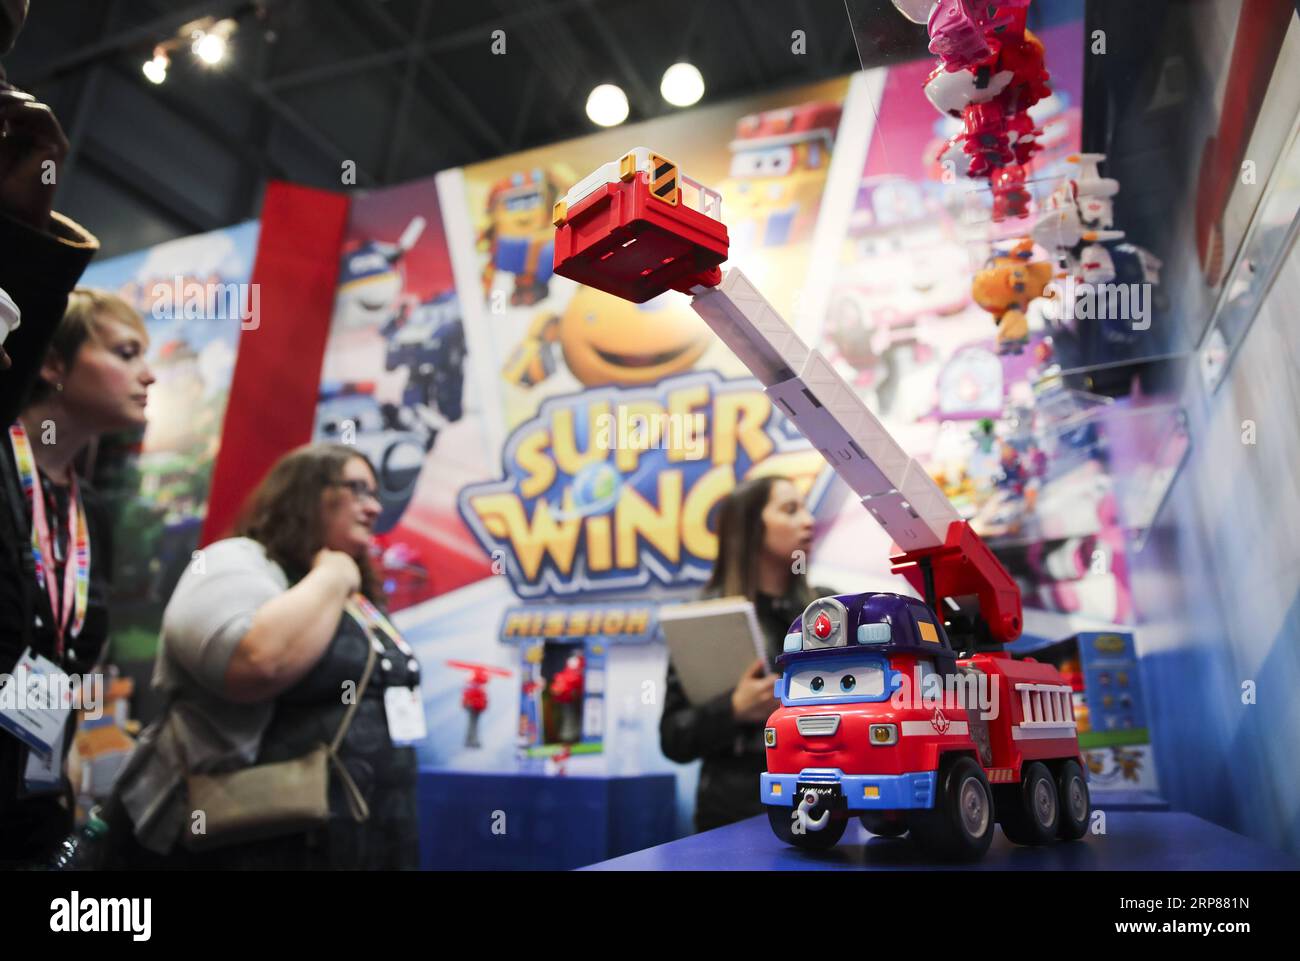 (190221) -- NEW YORK, Feb. 21, 2019 -- Visitors look at toy products of Super Wings at the booth of Alpha Group Co., Ltd., a major animation, toy and entertainment player from Guangdong Province in southern China, during the 116th Annual North American International Toy Fair at the Jacob K. Javits Convention Center in New York, the United States, Feb. 19, 2019. Chinese toy manufacturers, which produce around 75 percent of global toys each year, are rising up the value chain from the original role as contract manufacturers to designers and makers of their own brands. ) U.S.-NEW YORK-CHINESE TOY Stock Photo